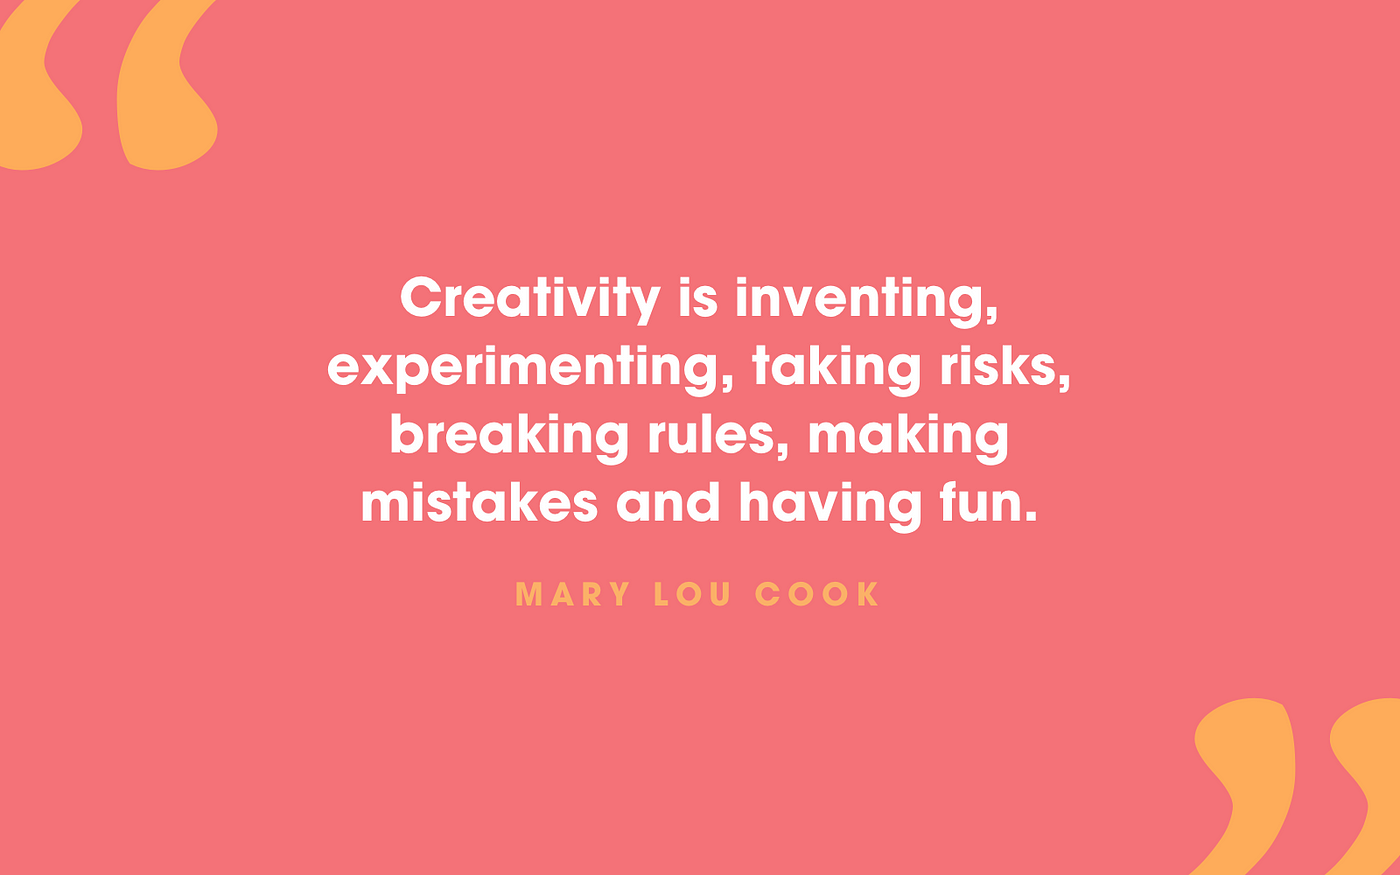 35 Quotes on Design That Will Fuel Up Your Creativity | by Eugen Eşanu ...